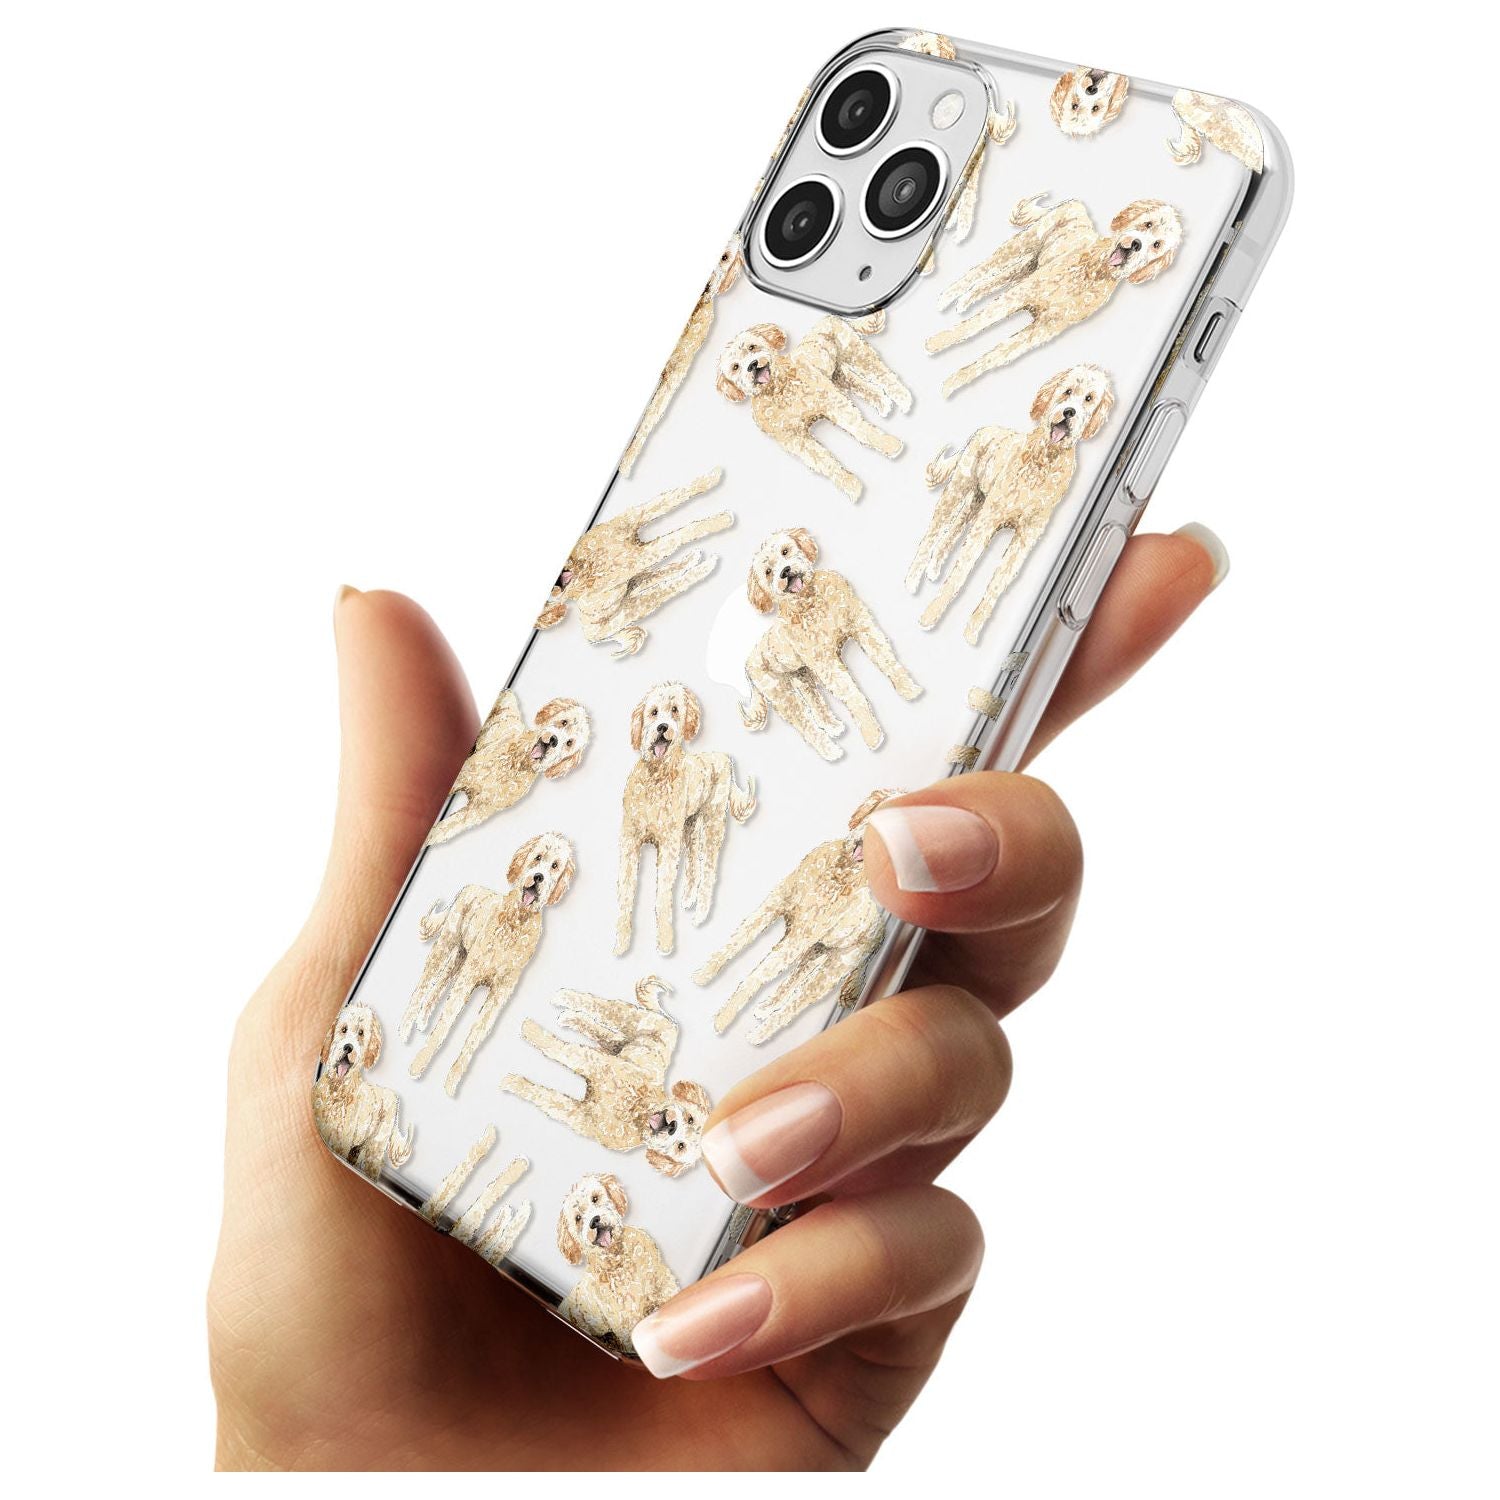 Goldendoodle Watercolour Dog Pattern Slim TPU Phone Case for iPhone 11 Pro Max